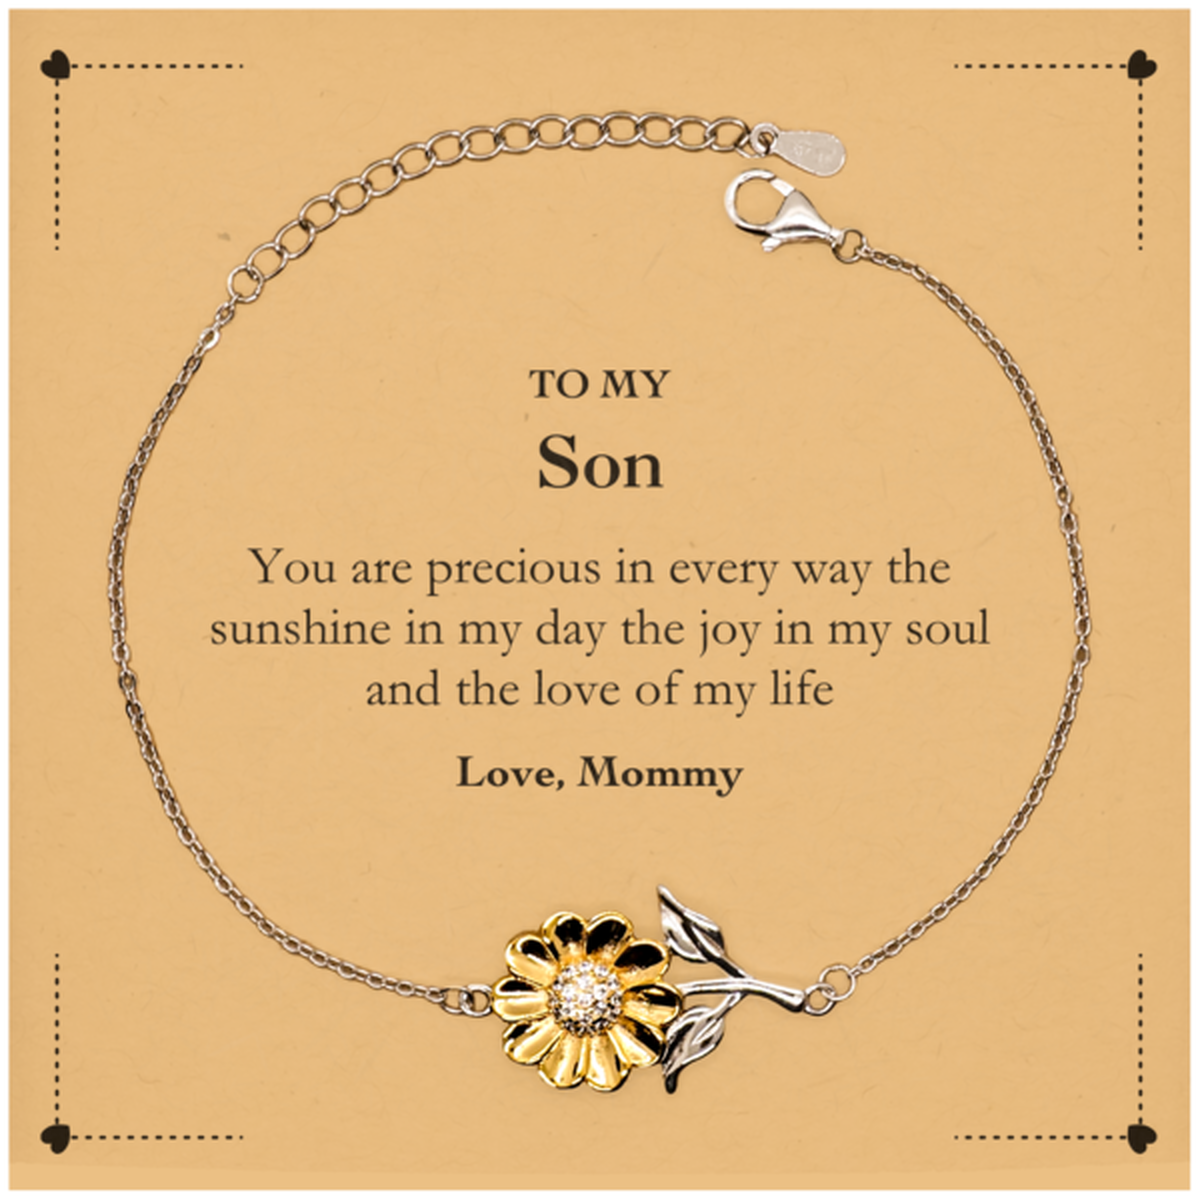 Graduation Gifts for Son Sunflower Bracelet Present from Mommy, Christmas Son Birthday Gifts Son You are precious in every way the sunshine in my day. Love, Mommy